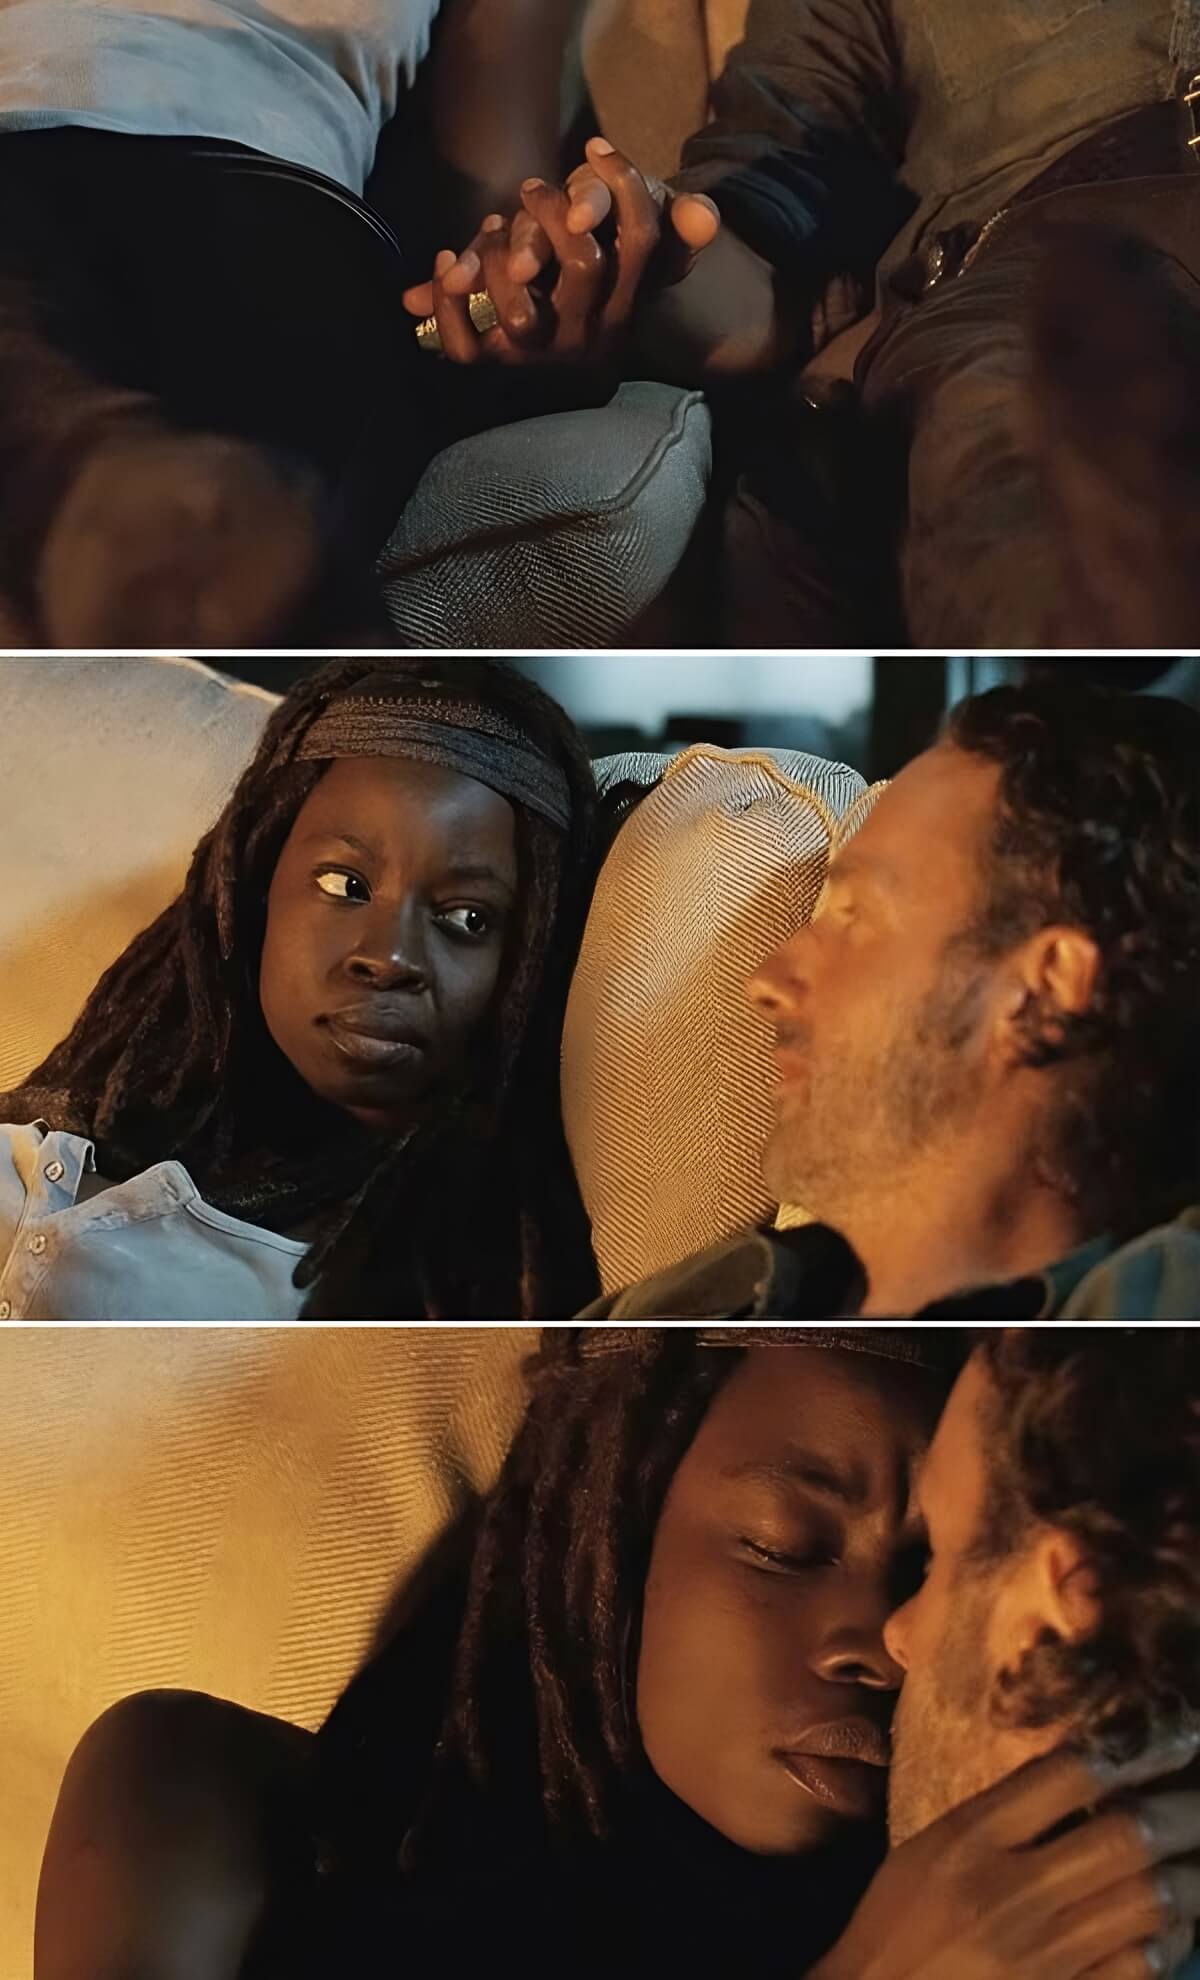 TV couples Rick Grimes and Michonne from The Walking Dead